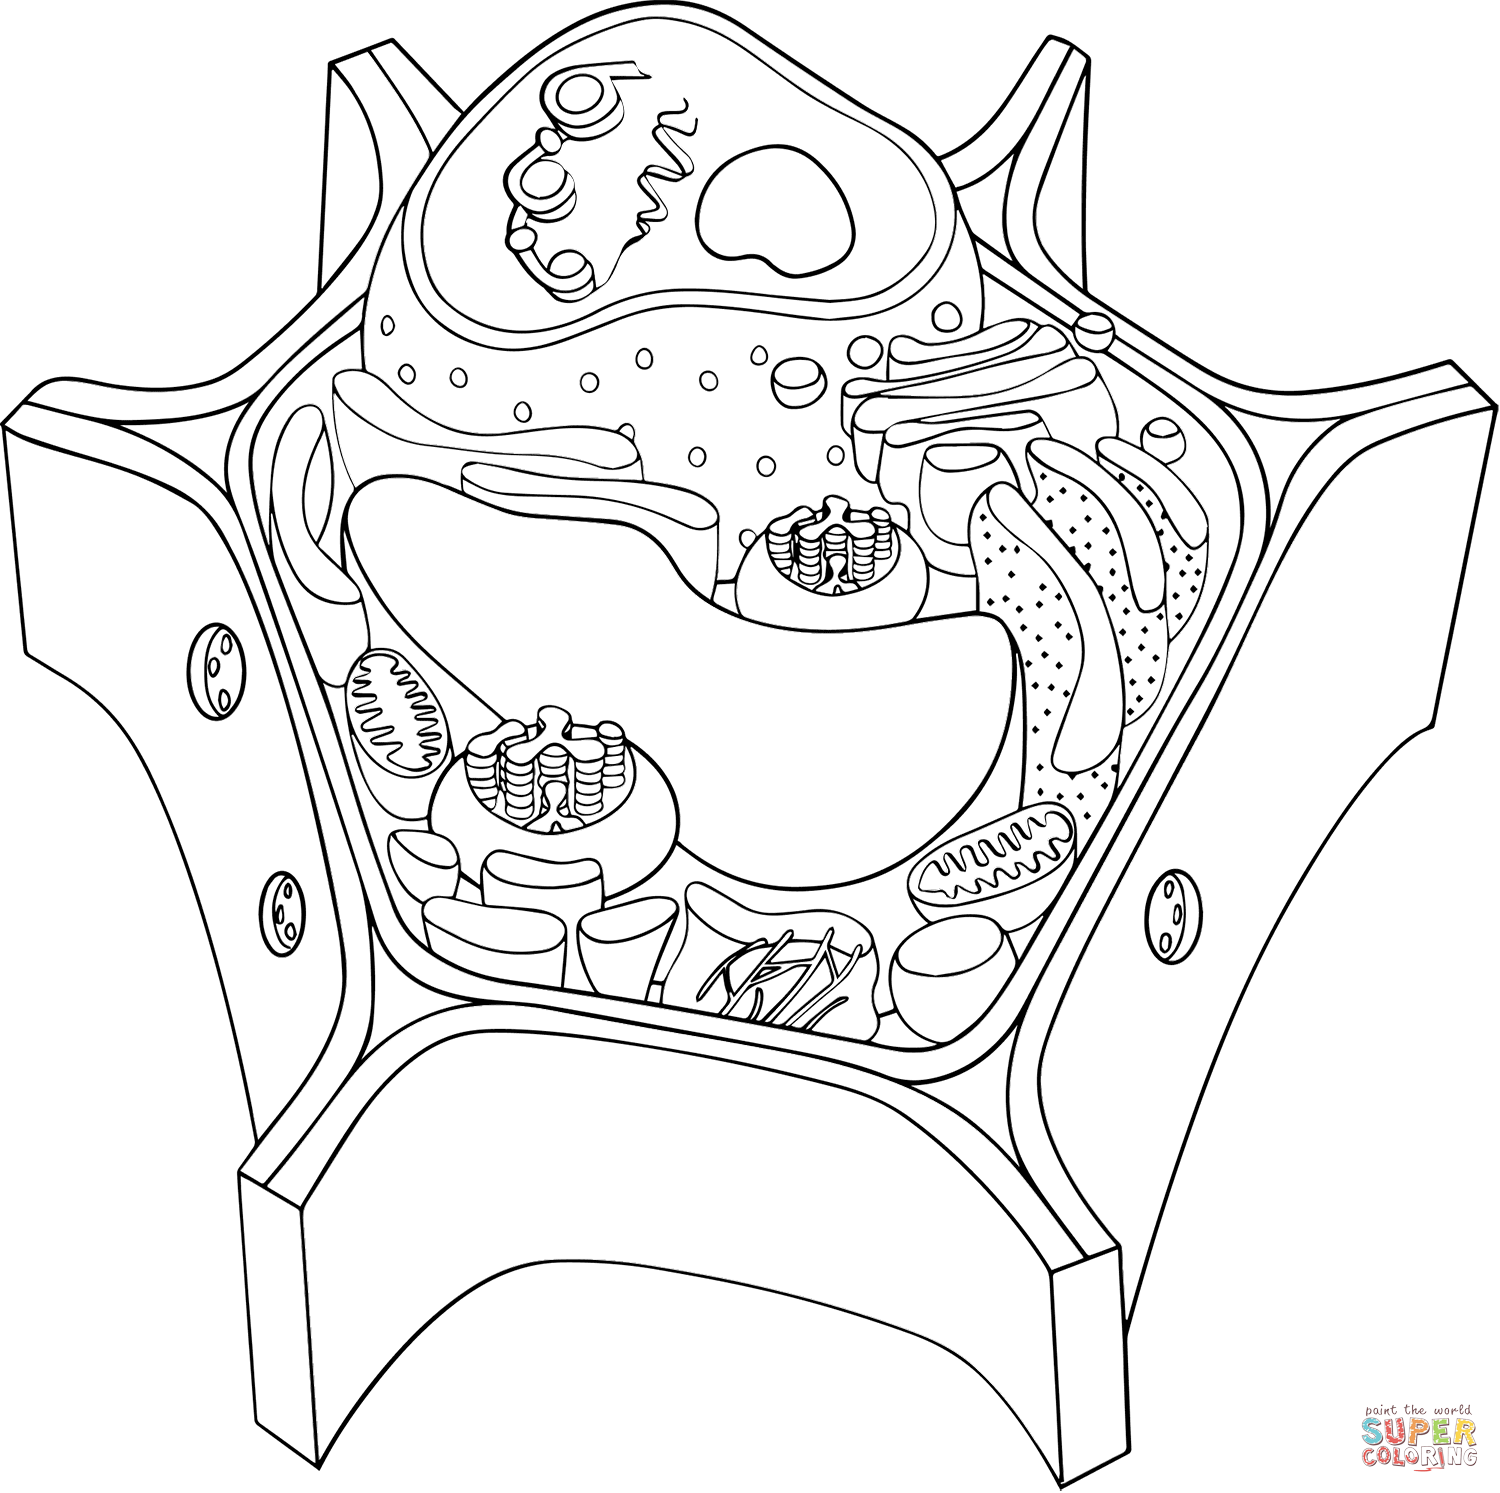 Plant and animal cells coloring page free printable coloring pages